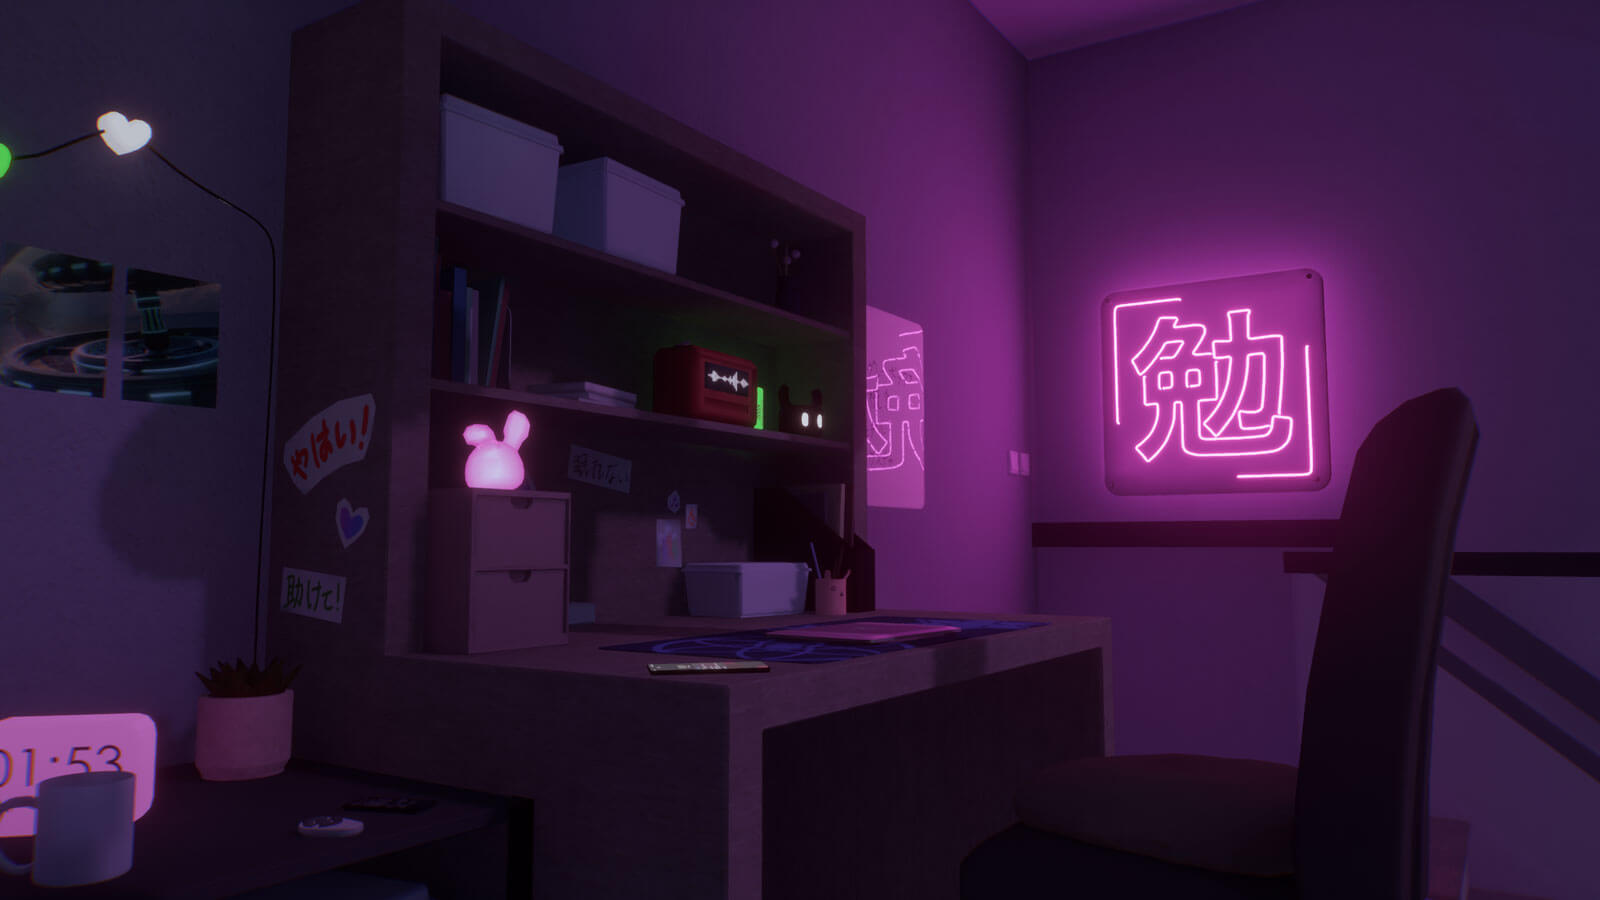 3D scene with a desk illuminated by a neon sign in the shape of a Japanese kanji.